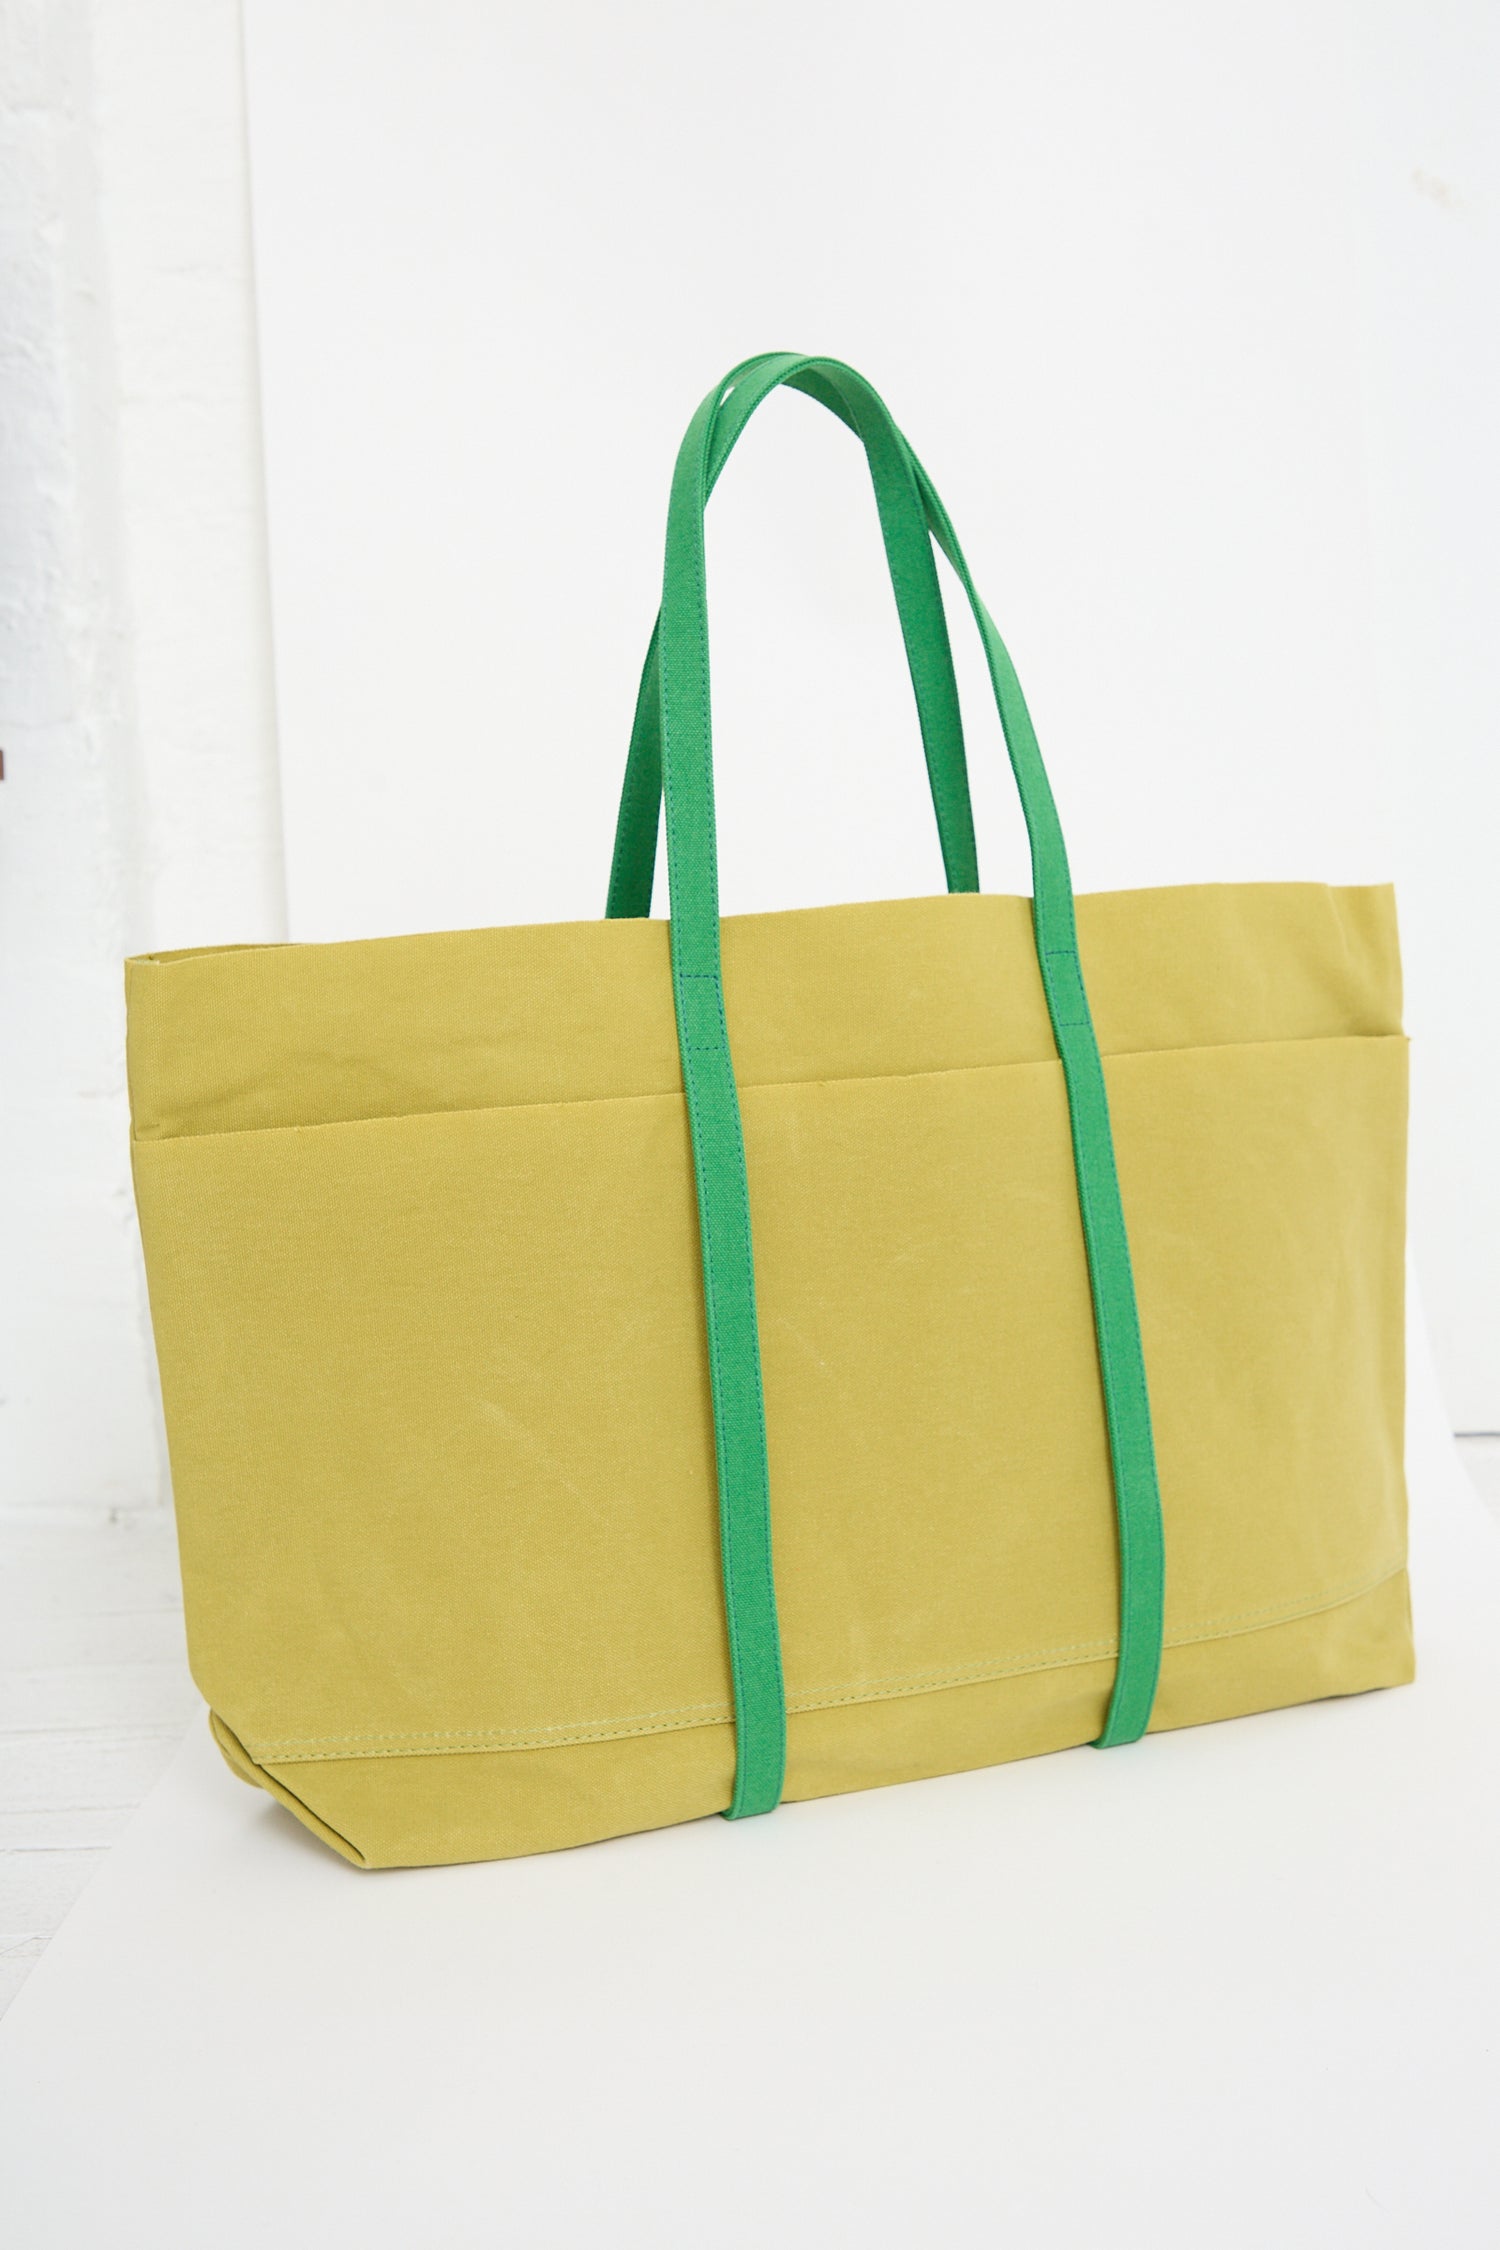 Light Ounce Canvas Tote in Lime and Green by Amiacalva against a white background.